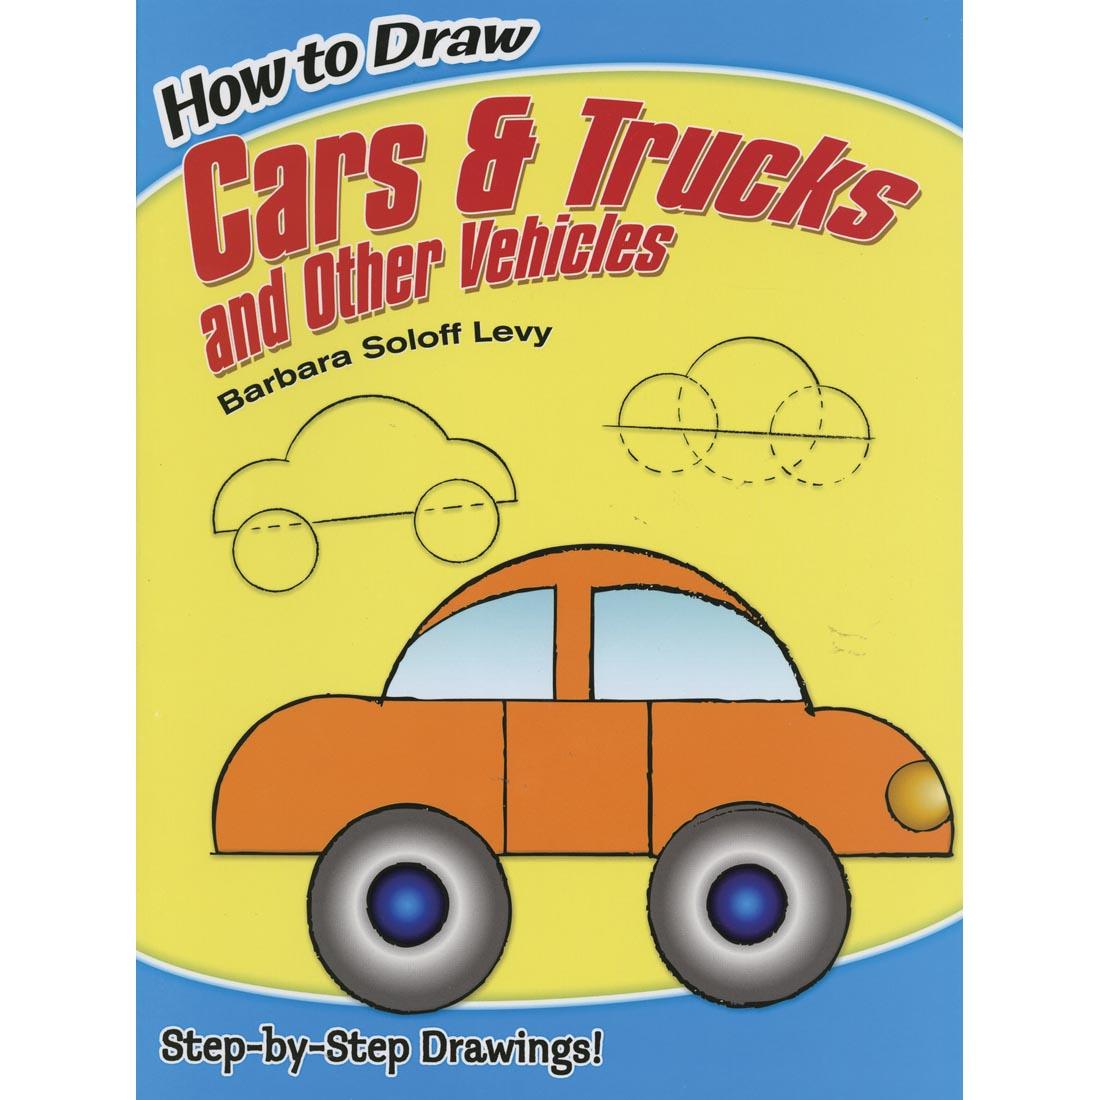 How To Draw Cars & Trucks and Other Vehicles by Dover